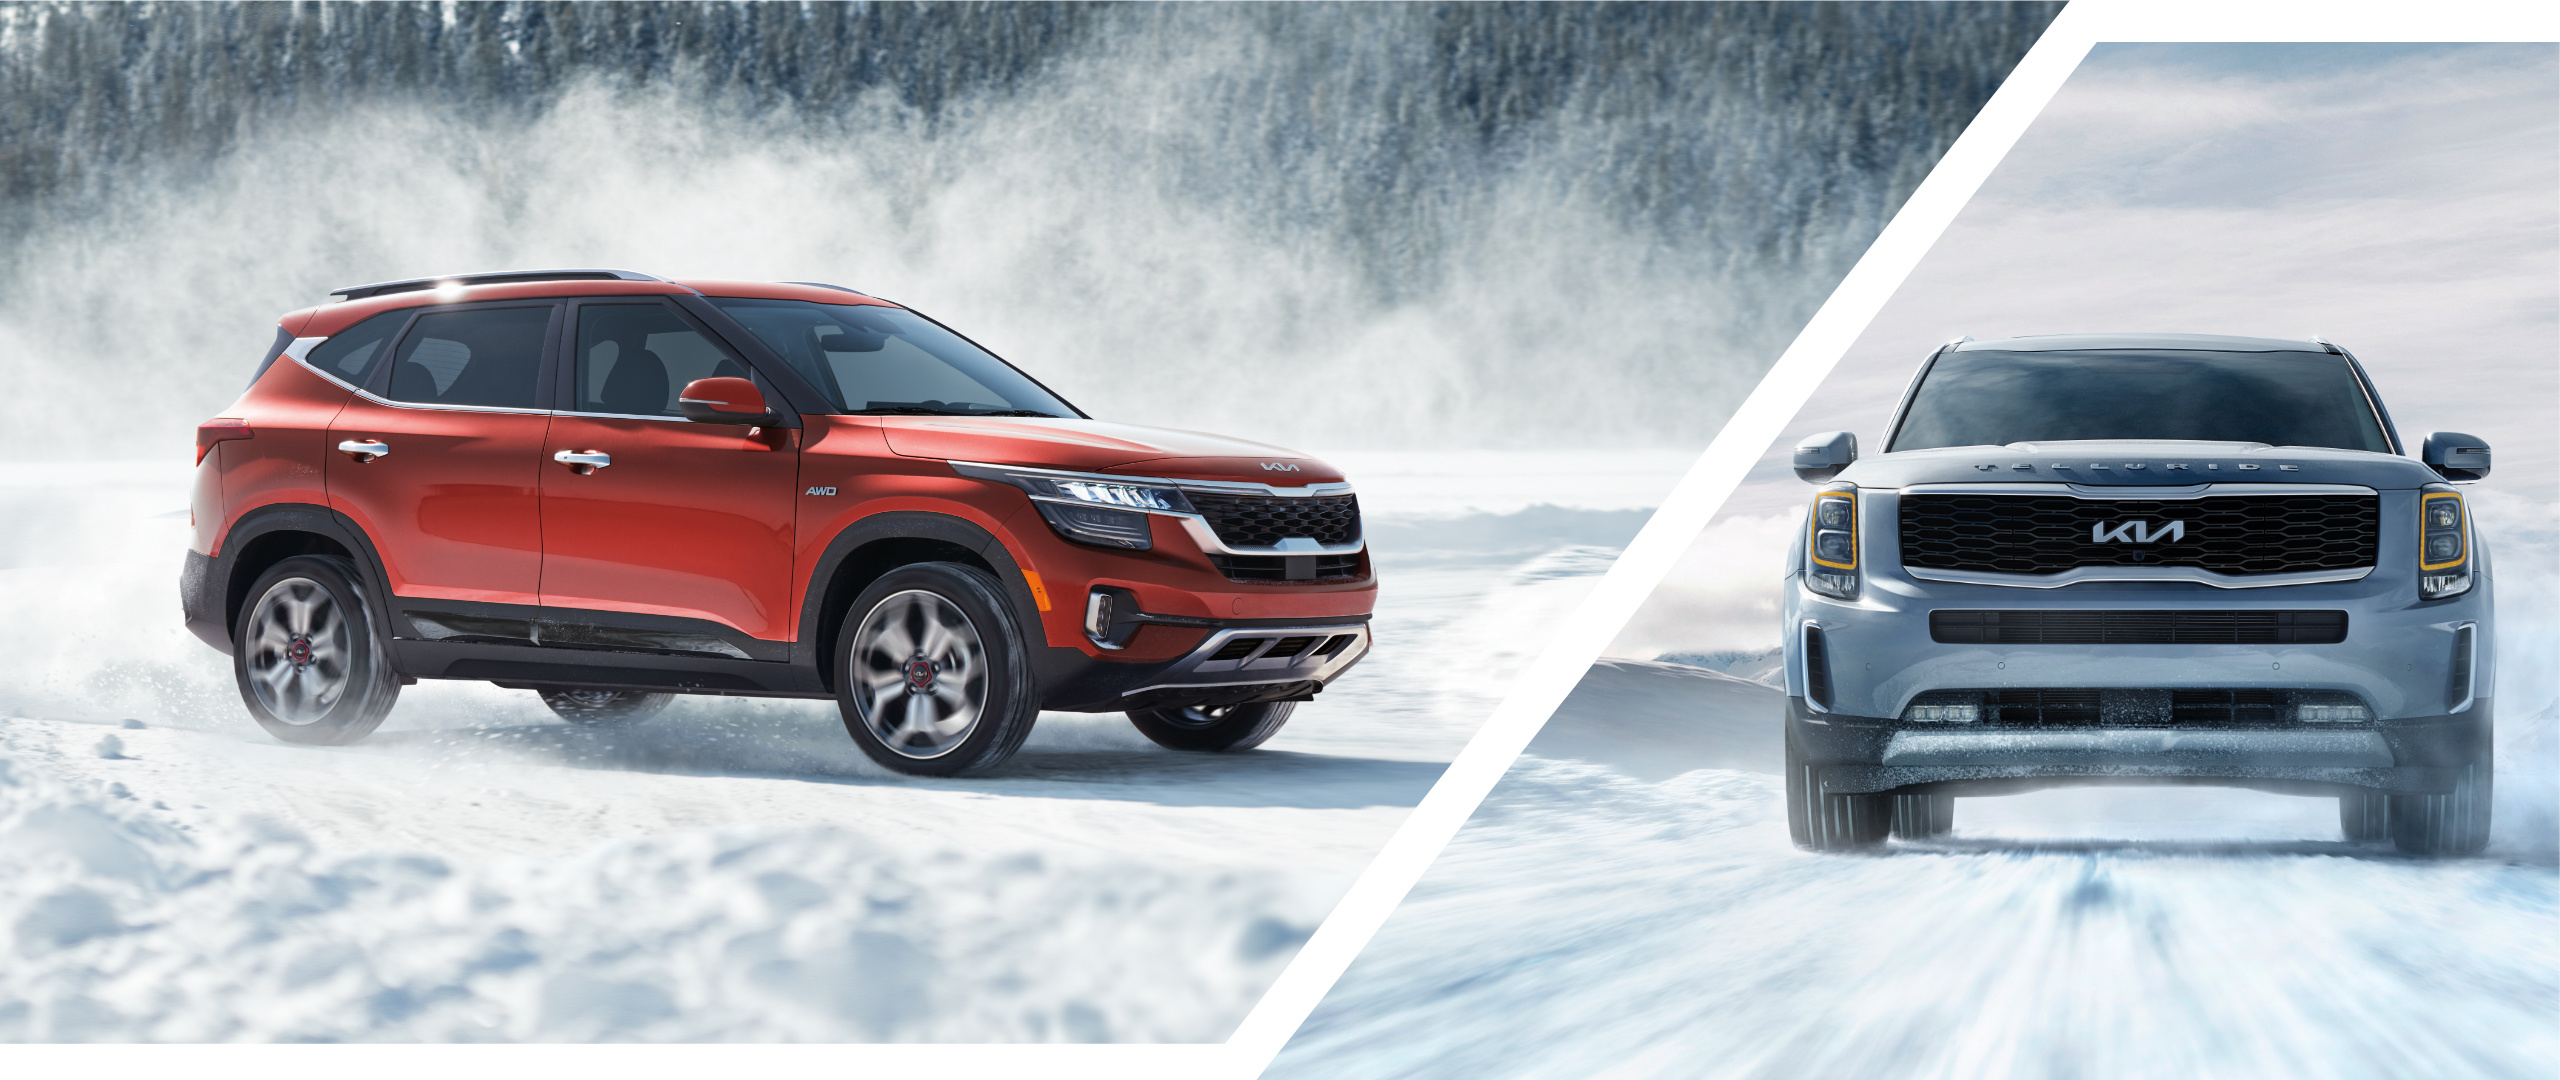 2022 Kia Seltos And 2022 Kia Telluride Driving In Snowy Conditions With All-Wheel Drive Lock Mode